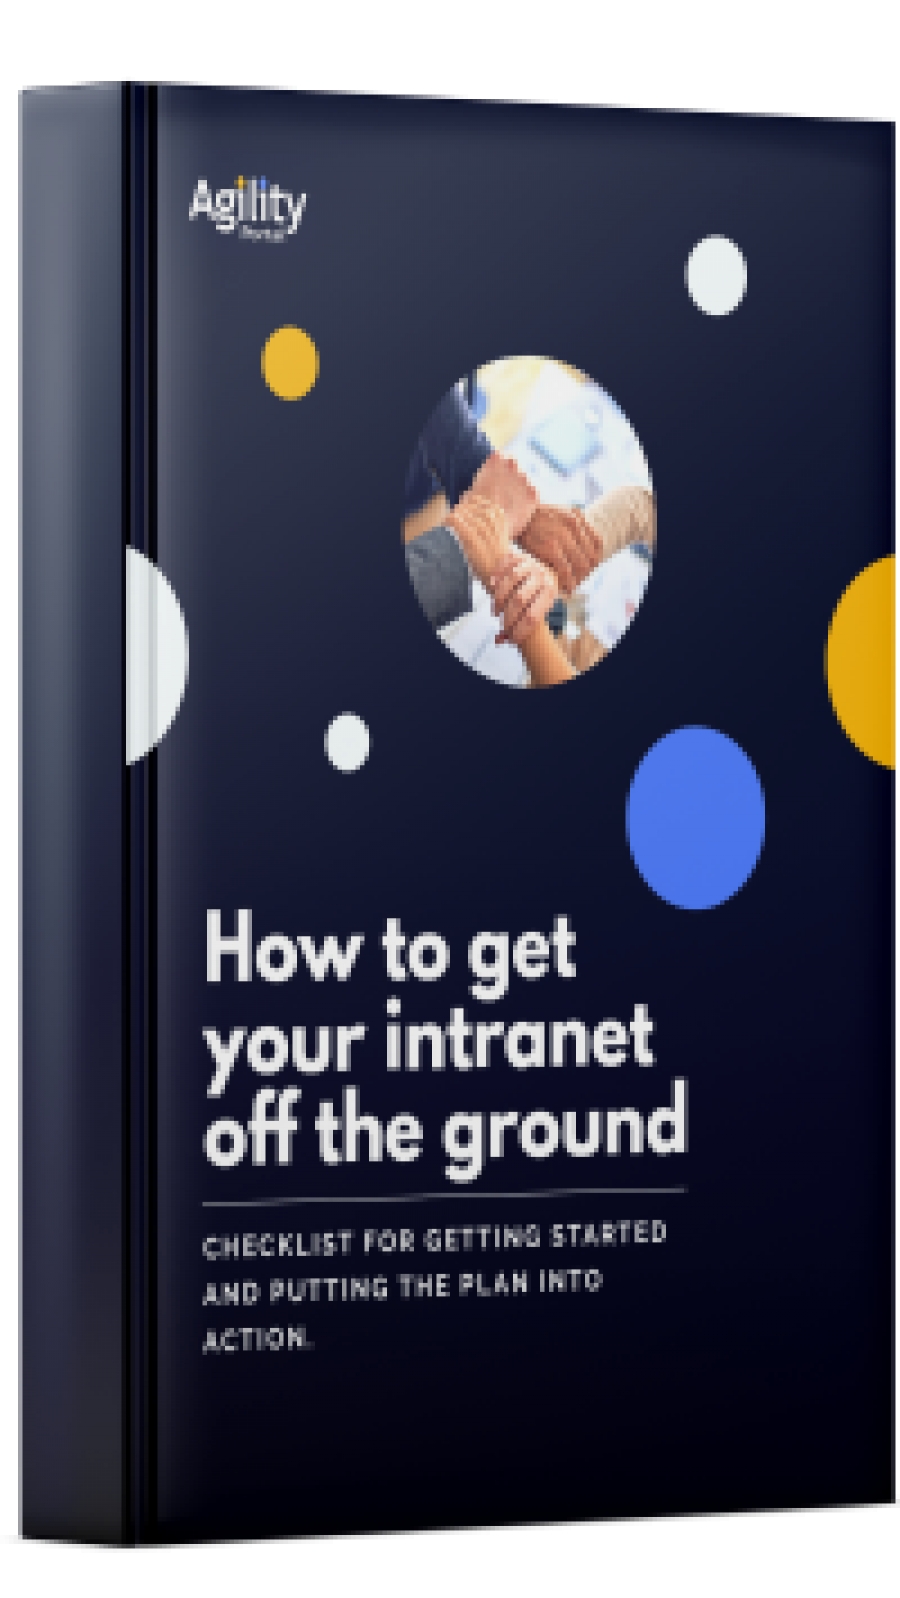 How to get your intranet off the ground